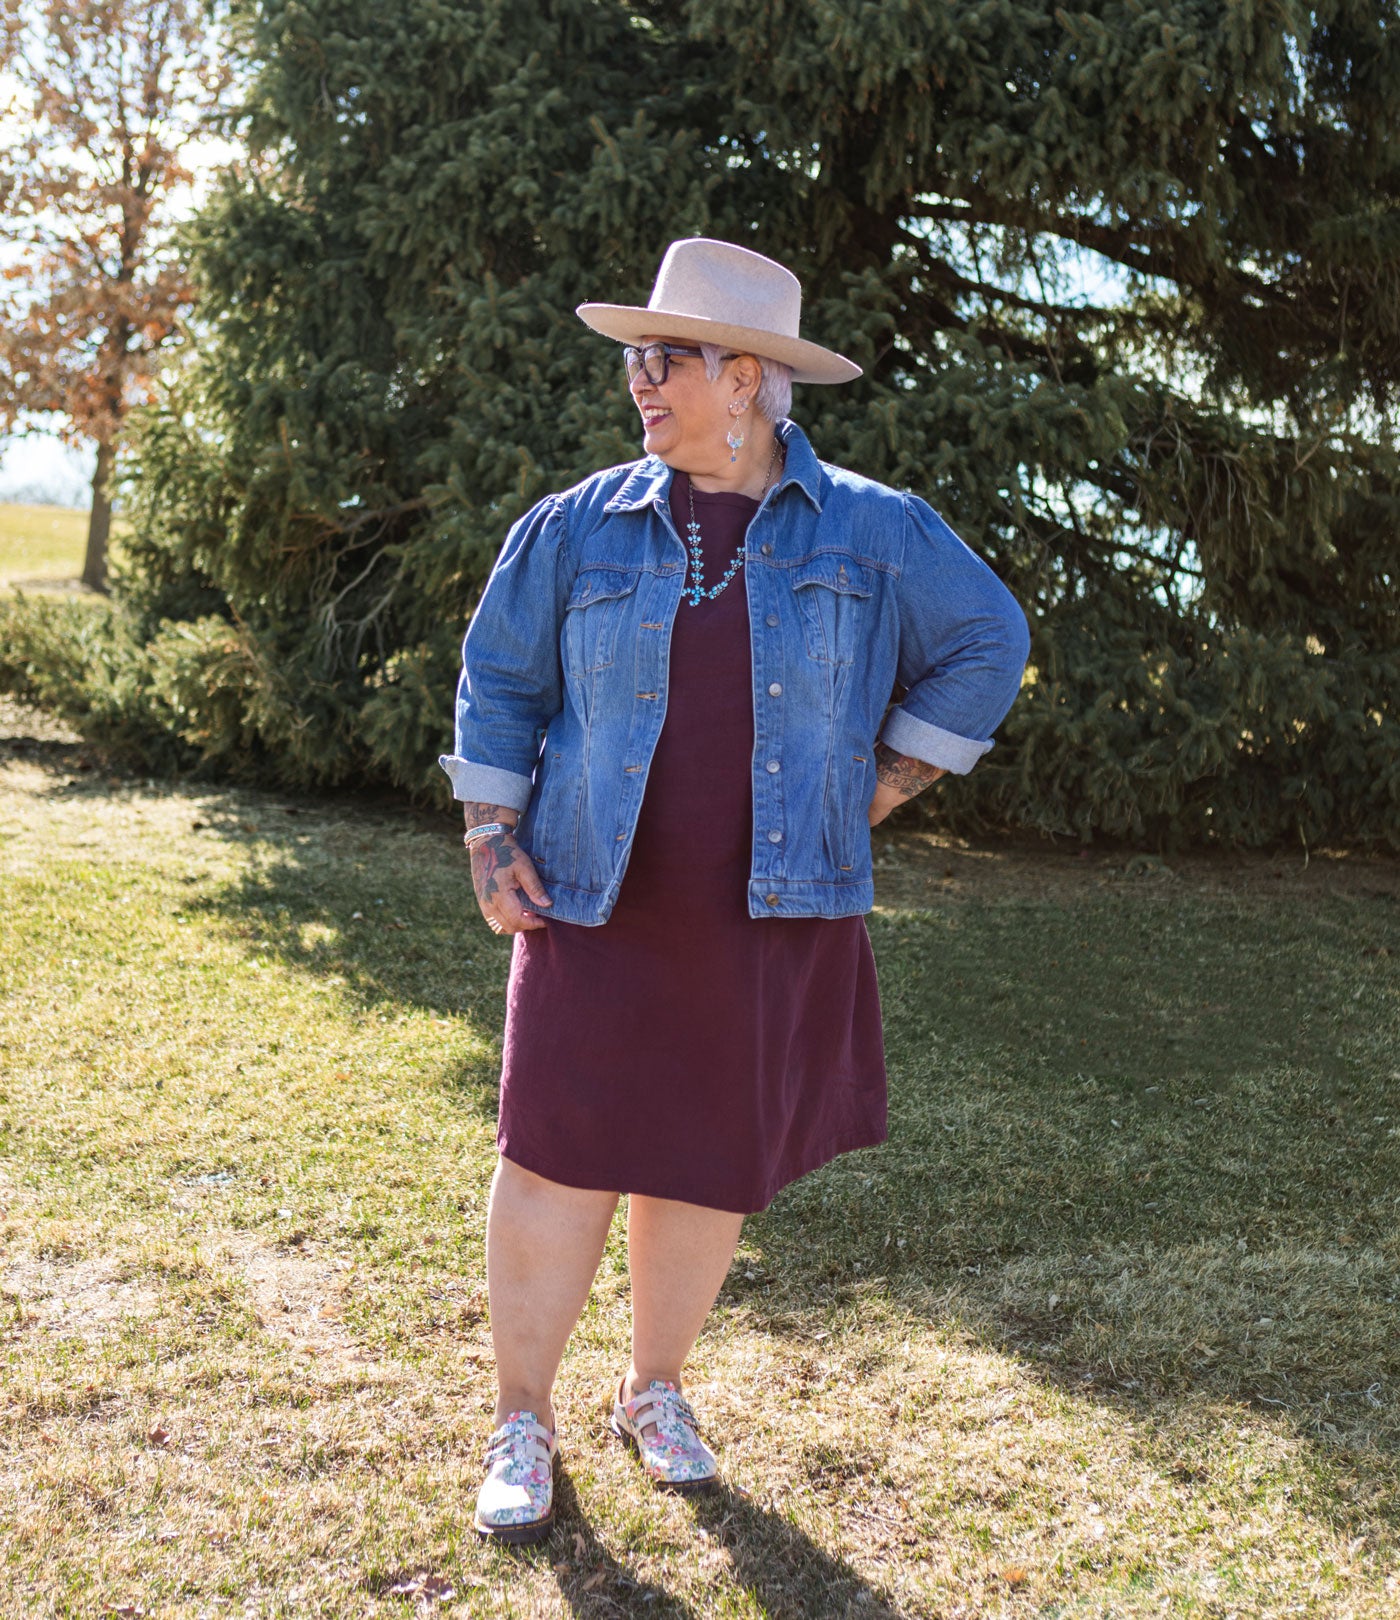 This is an image of Yolanda wearing her Camber Set dress in Nomad Linen.  Twill in Merlot. She is wearing a jean jacket over it and a light brown hat.  